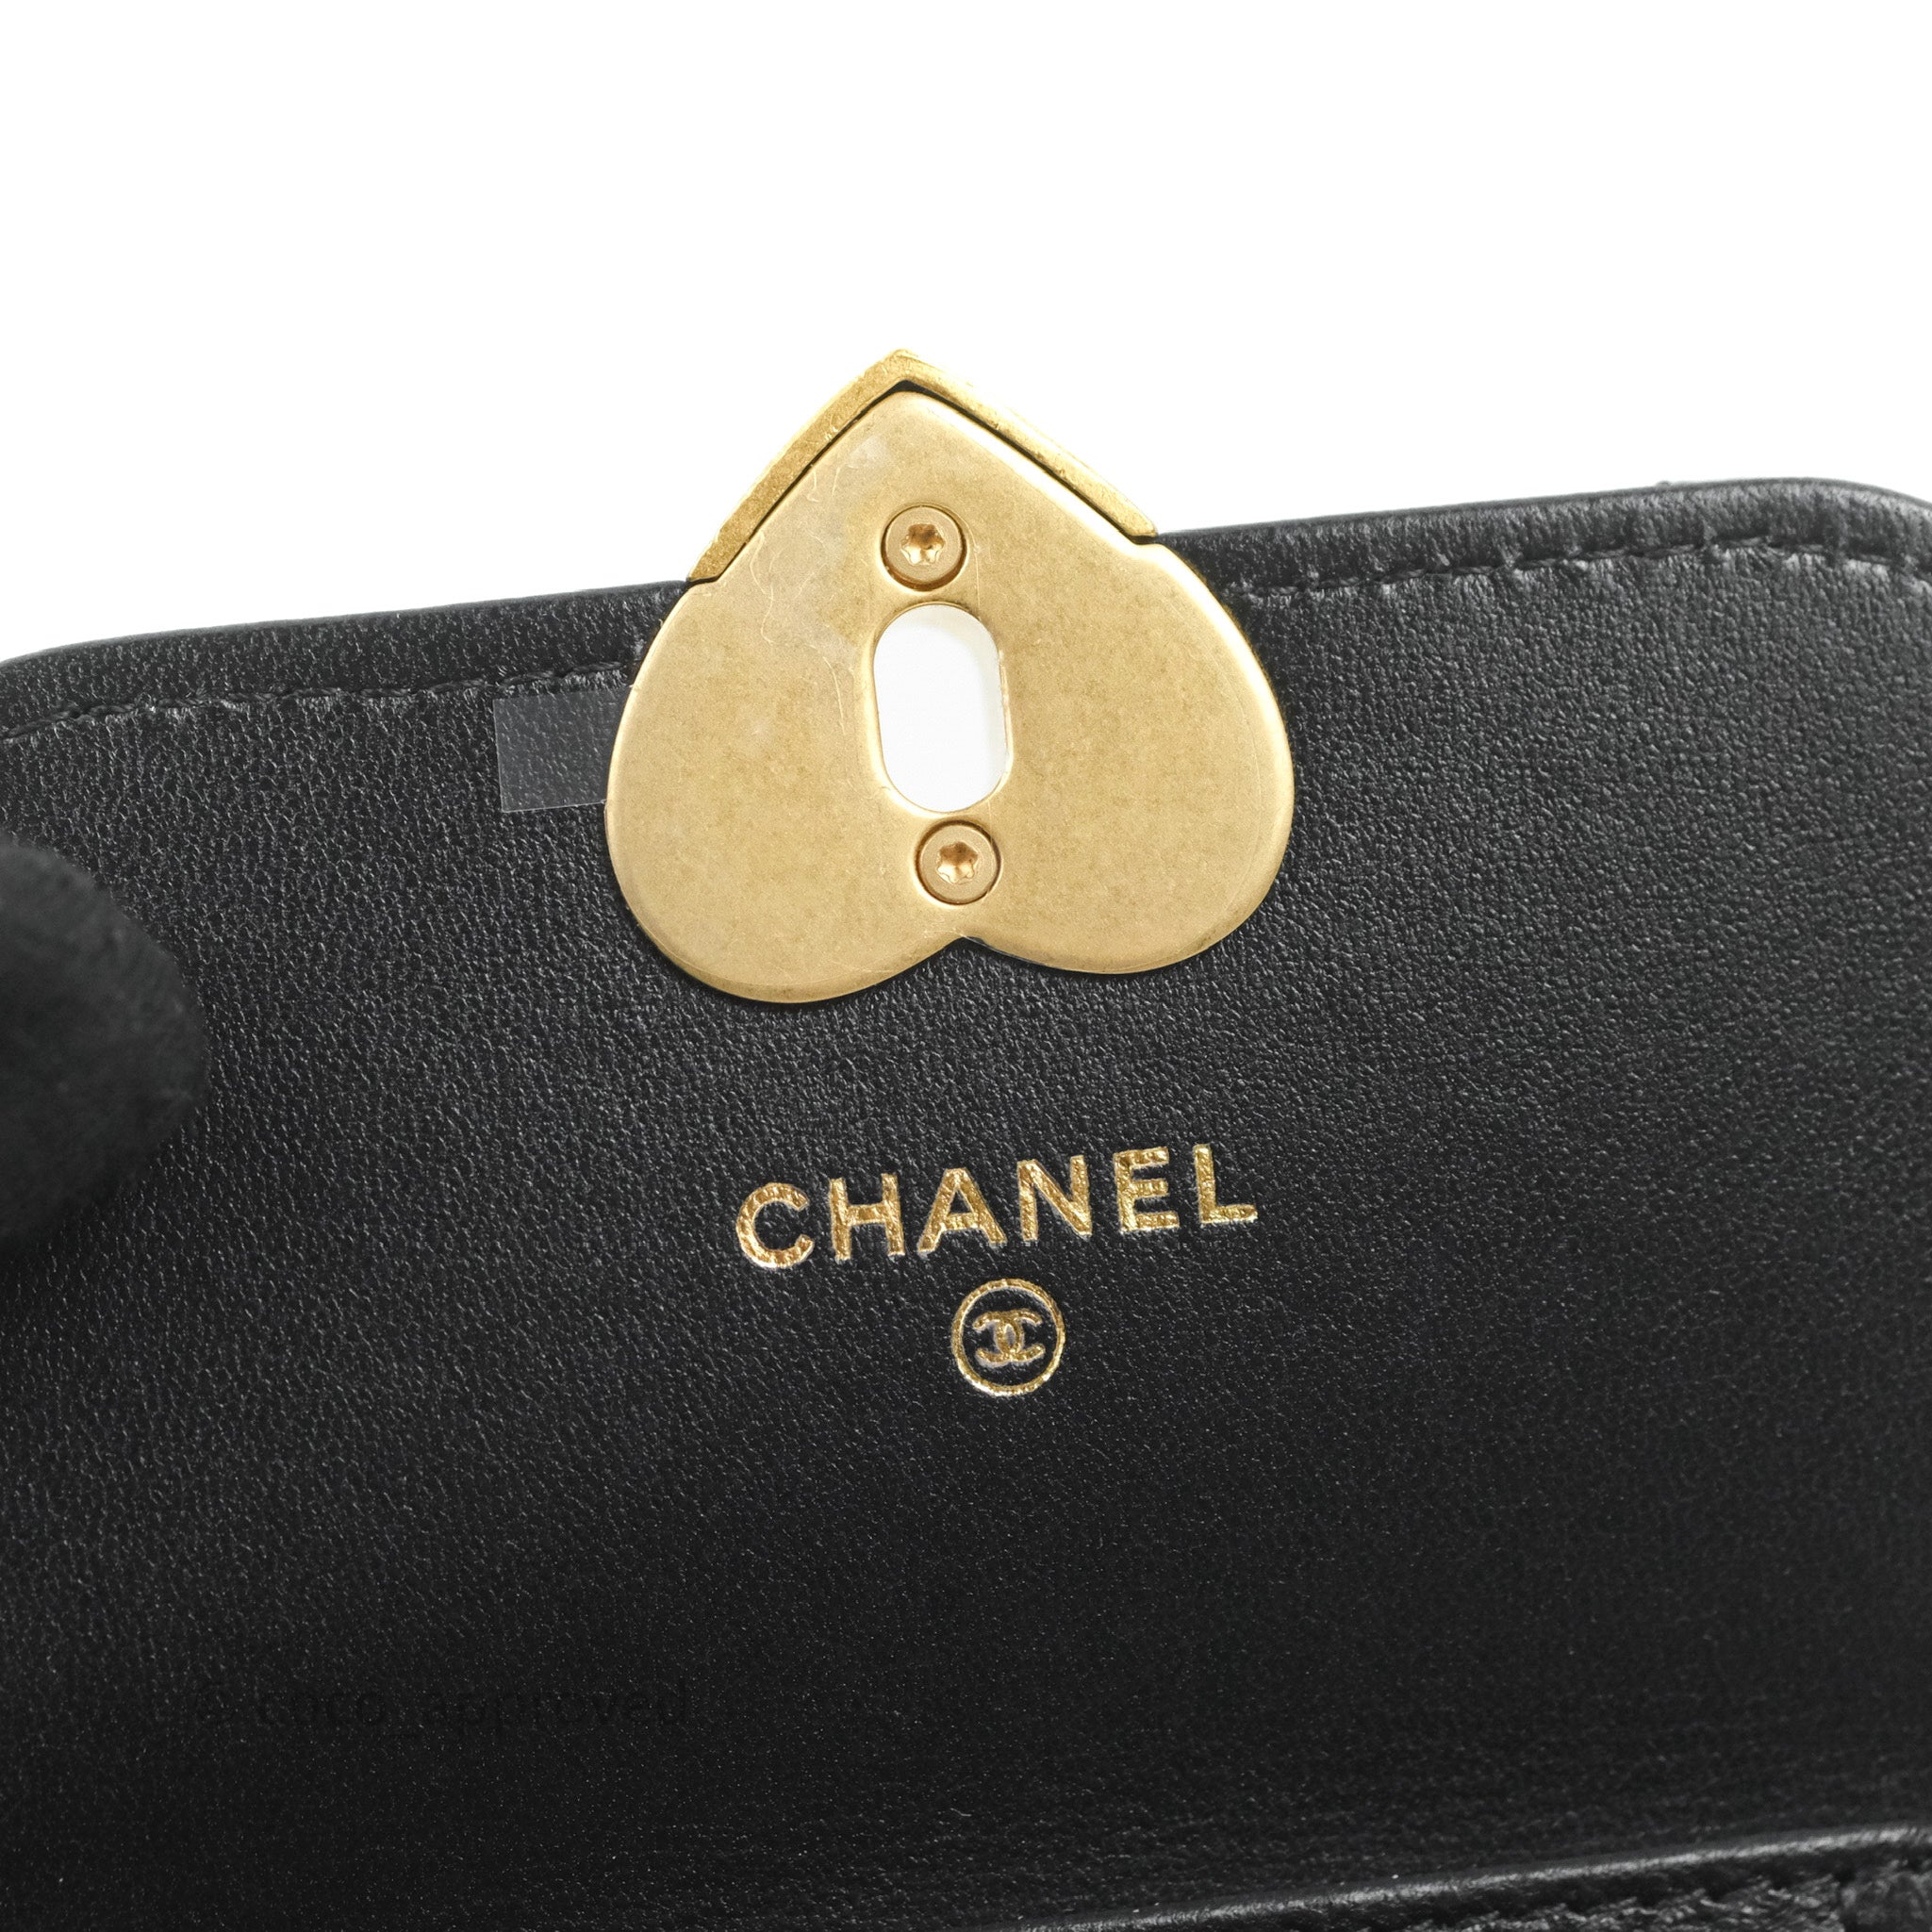 Chanel Heart CC Lock Clutch with Chain Black Lambskin Gold Hardware 23 –  Coco Approved Studio